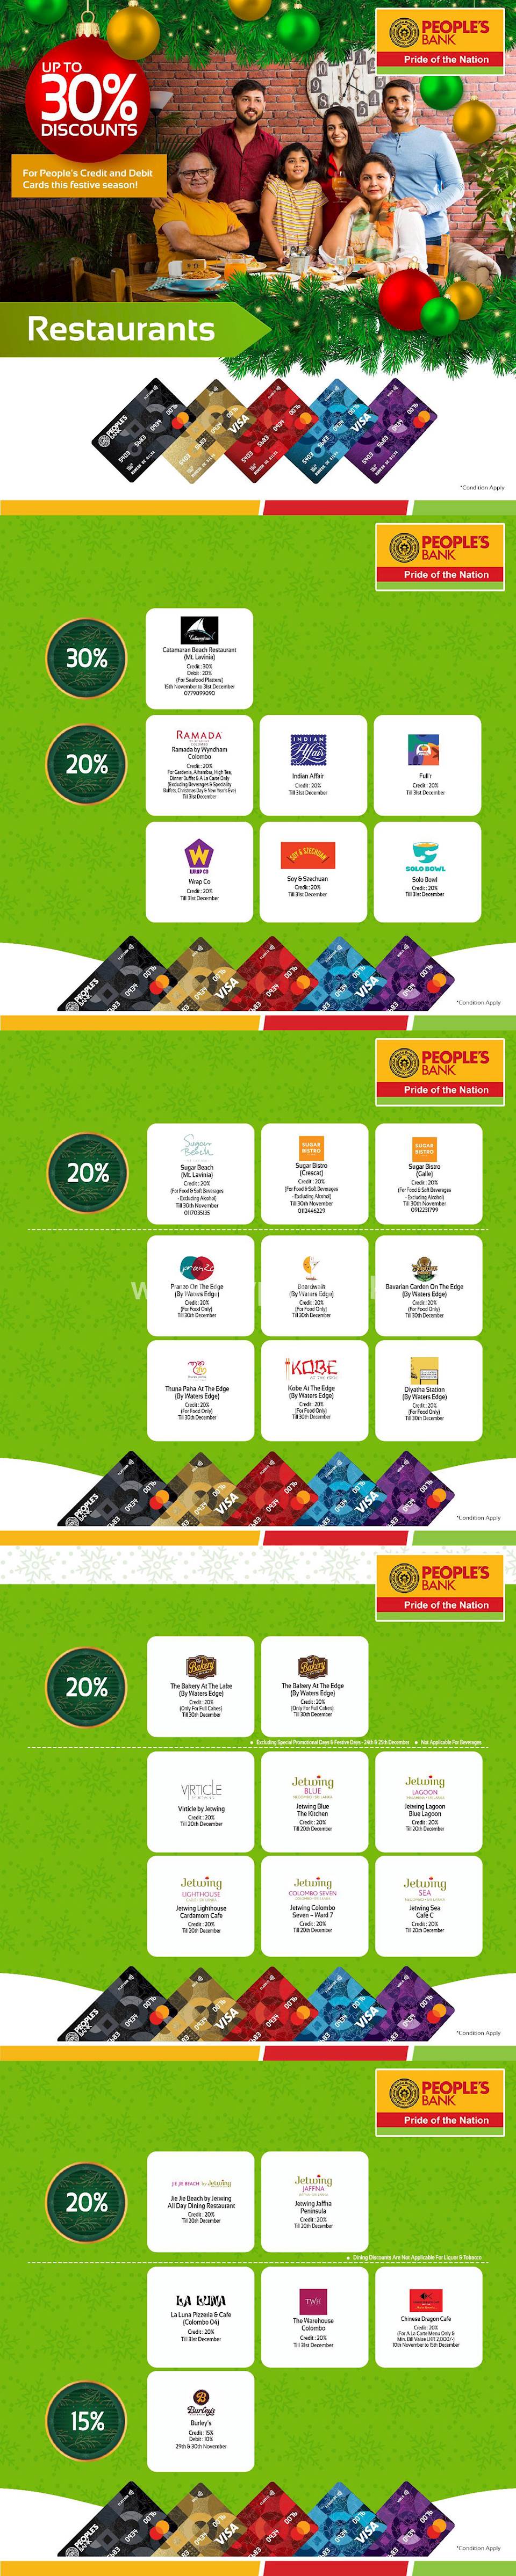 Up to 30% discounts at Restaurants on your People’s Bank Credit or Debit Card